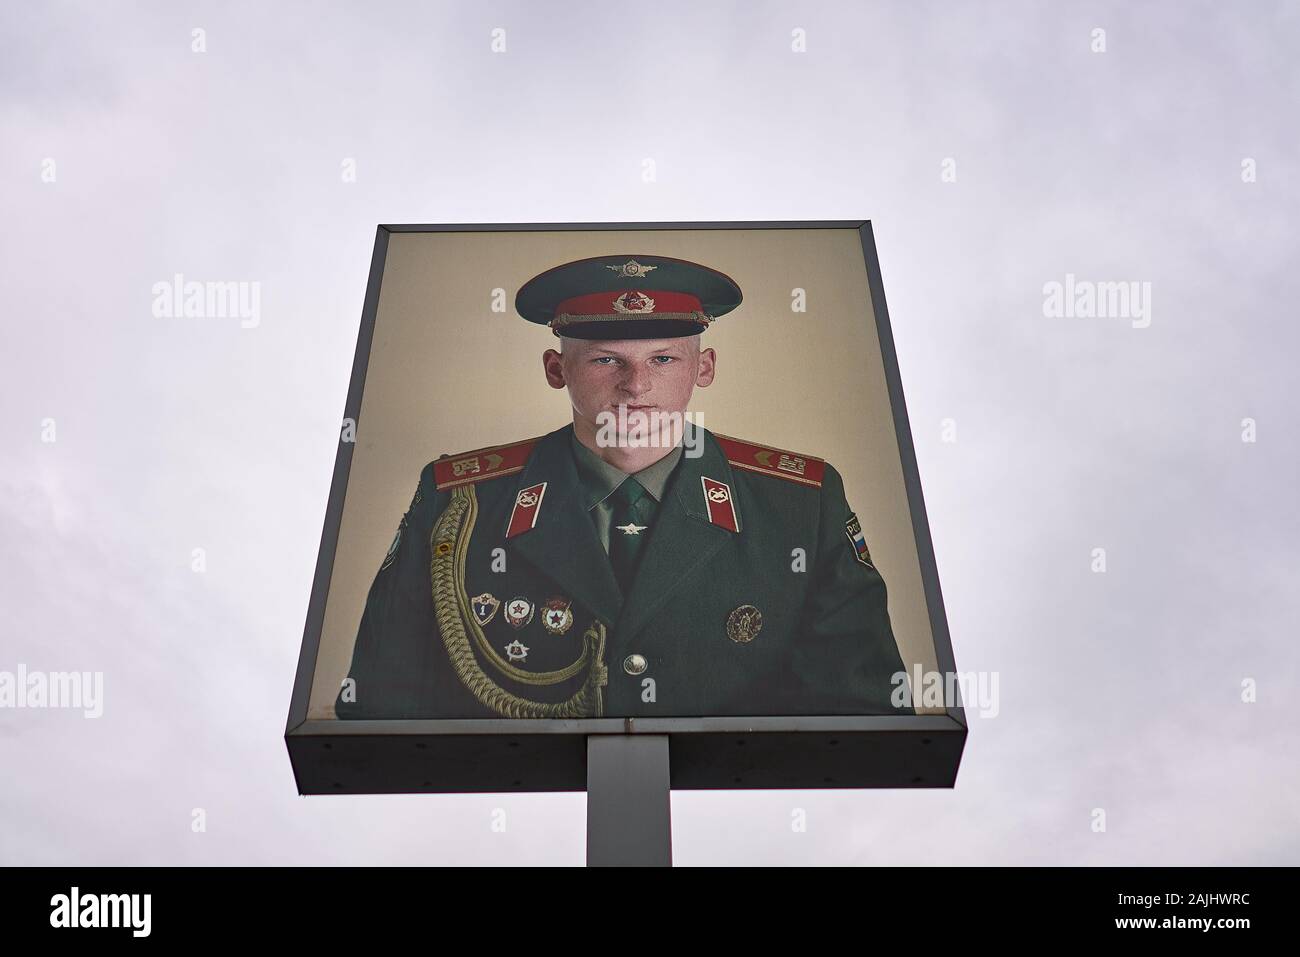 Photo of unknown Russian Soldier posted at the infamous Check-Point Charlie historical site in downtown Berlin. Stock Photo